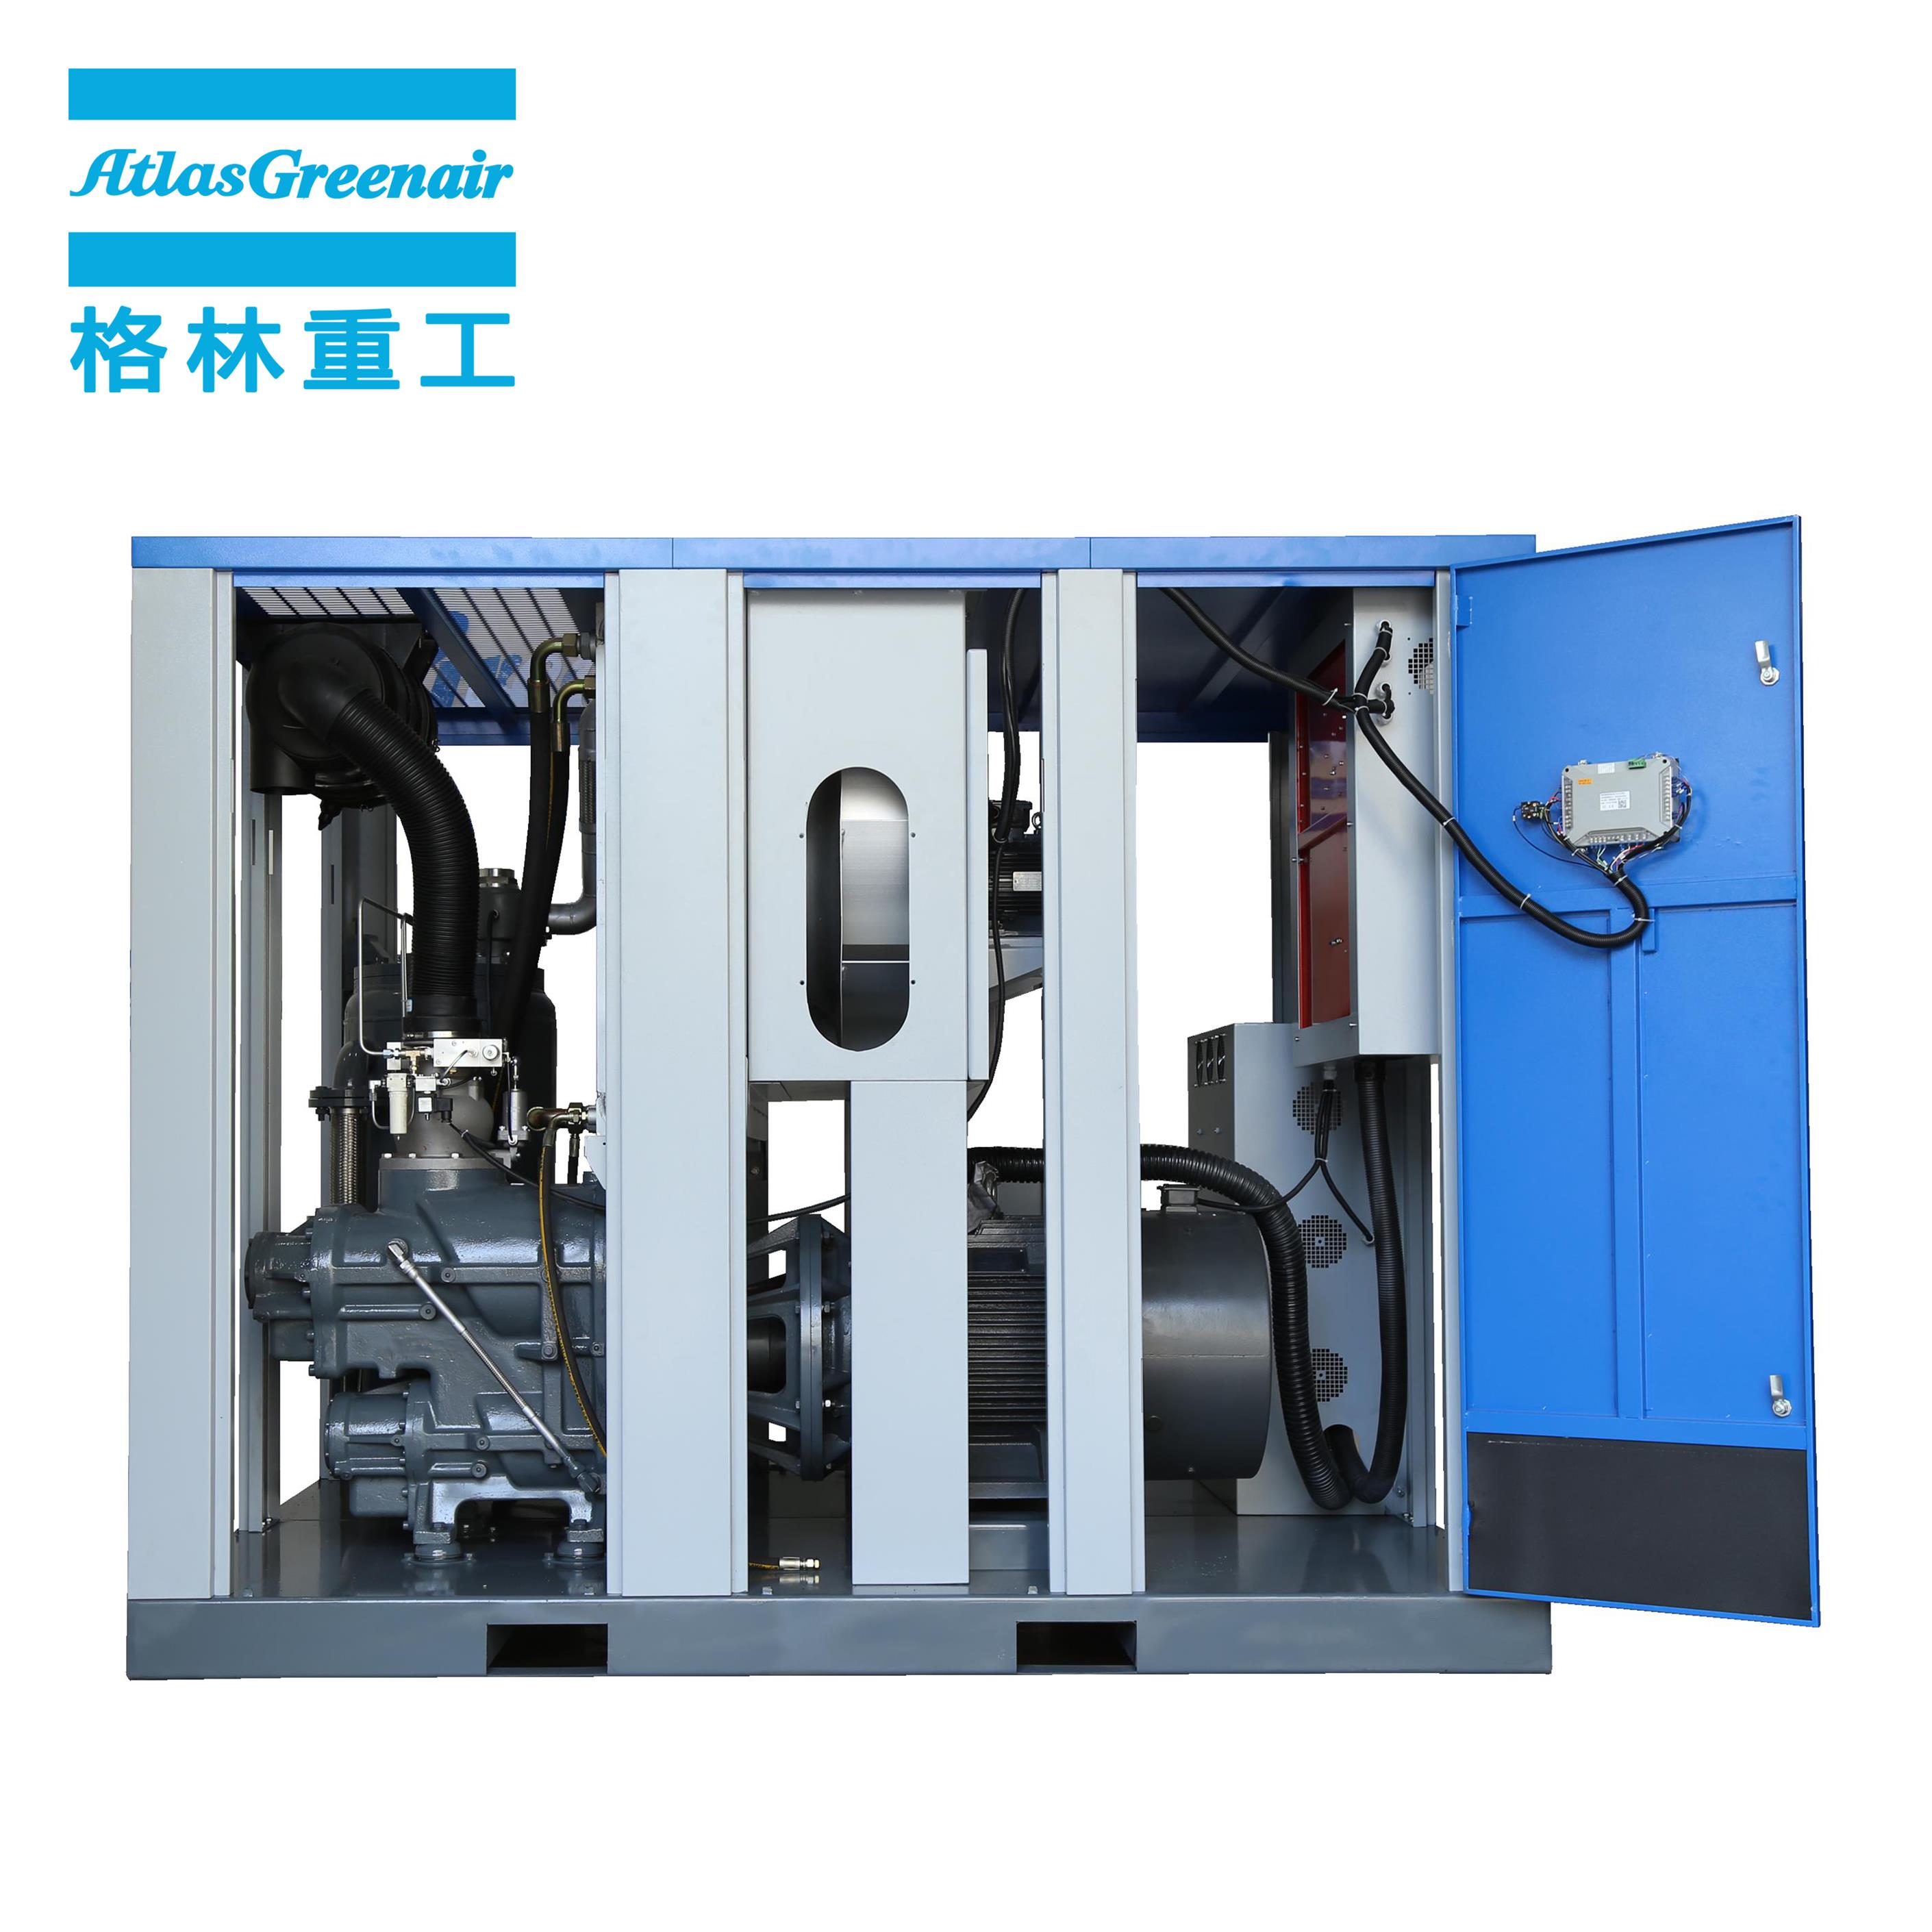 Atlas Greenair Screw Air Compressor new variable speed air compressor with an asynchronous motor for tropical area-2